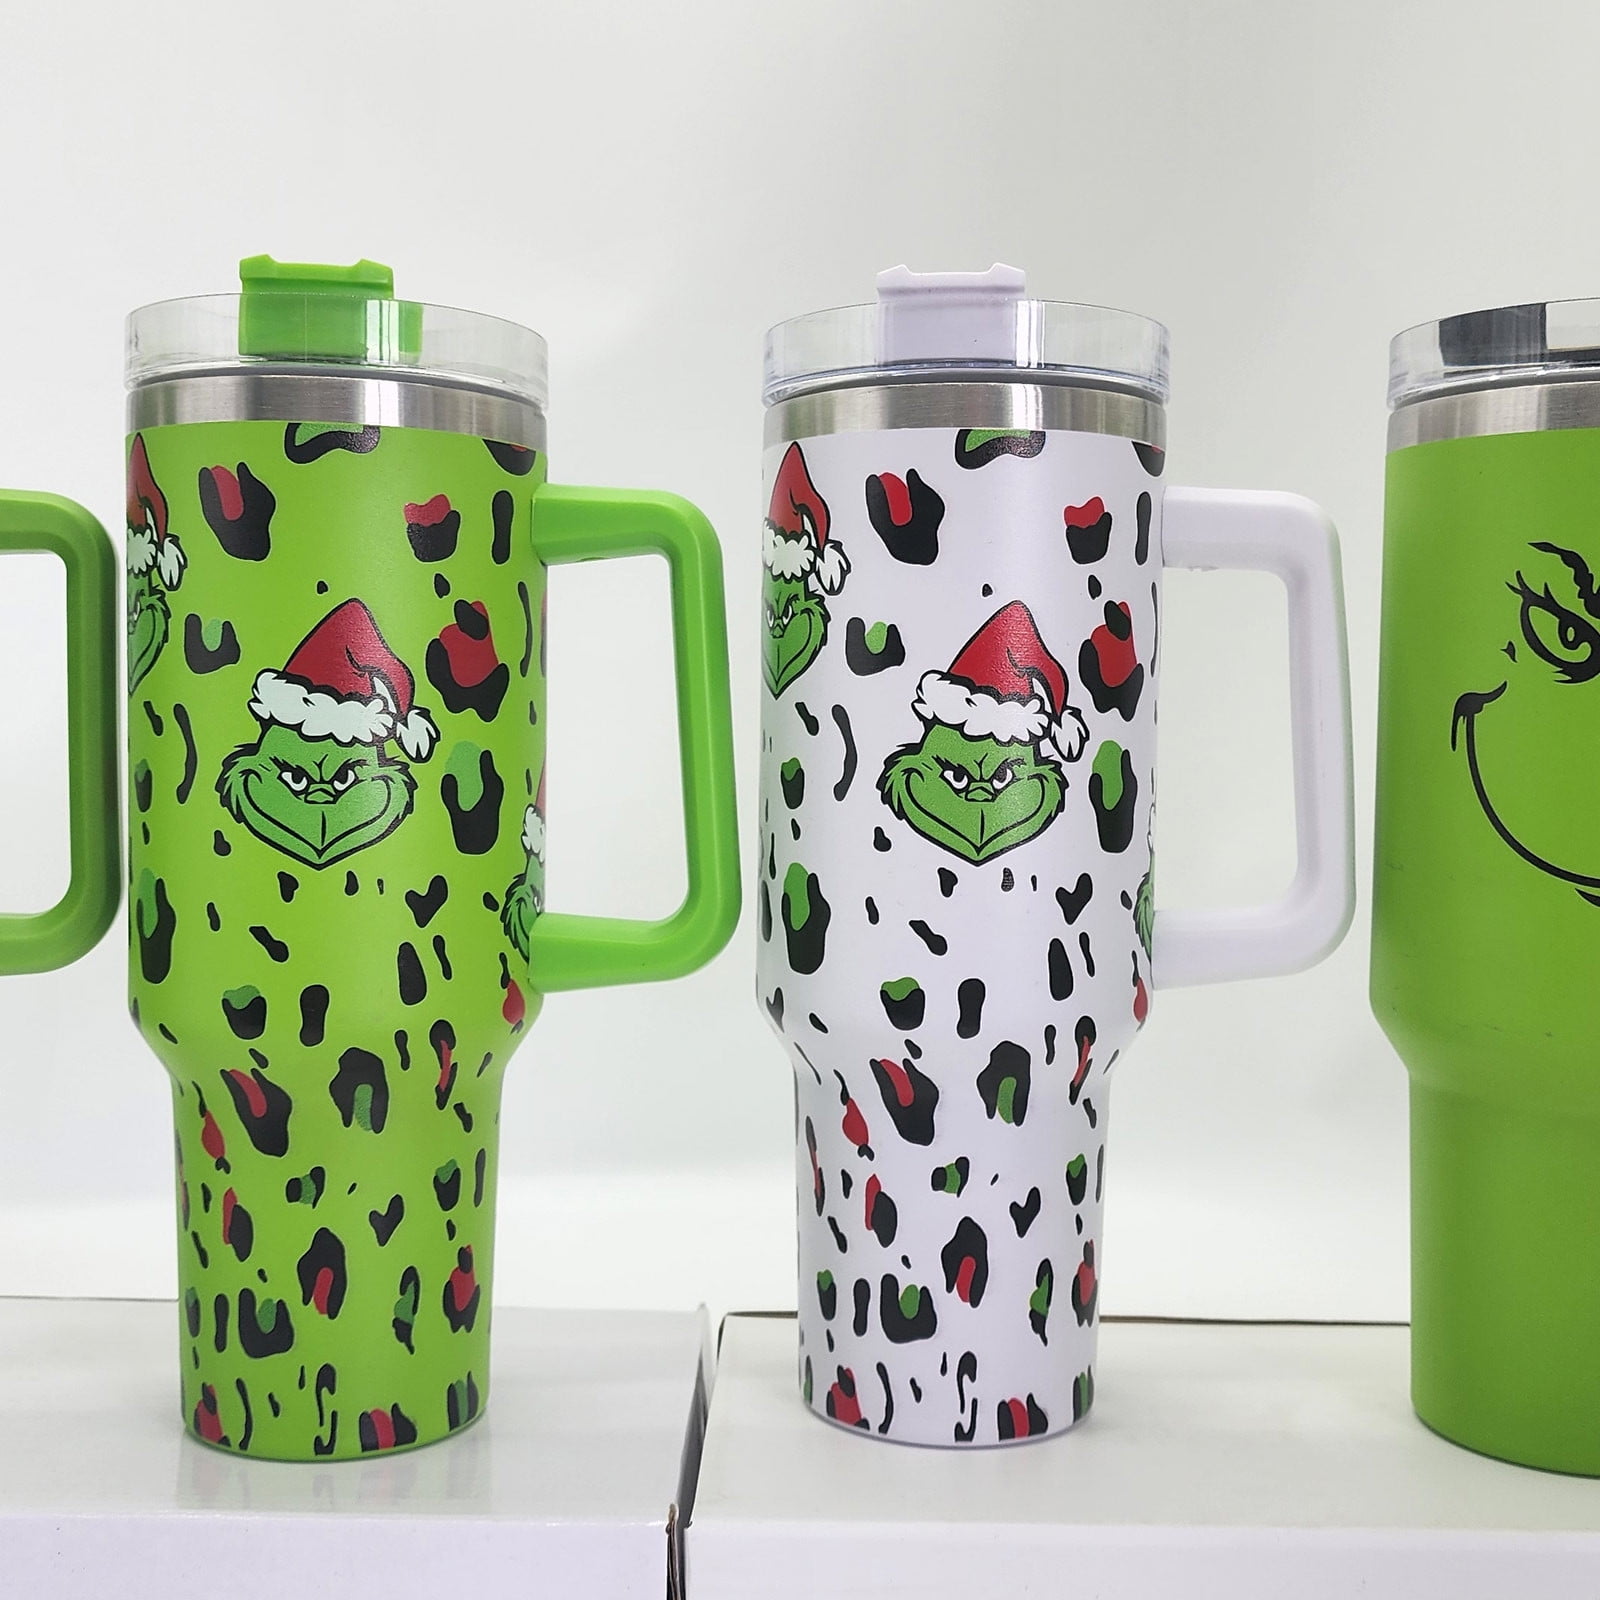 How The Grinch Stole Christmas 40 Oz Tumbler, Stainless Steel Drinkware,  Gift for Grinch Lovers, Personalize it